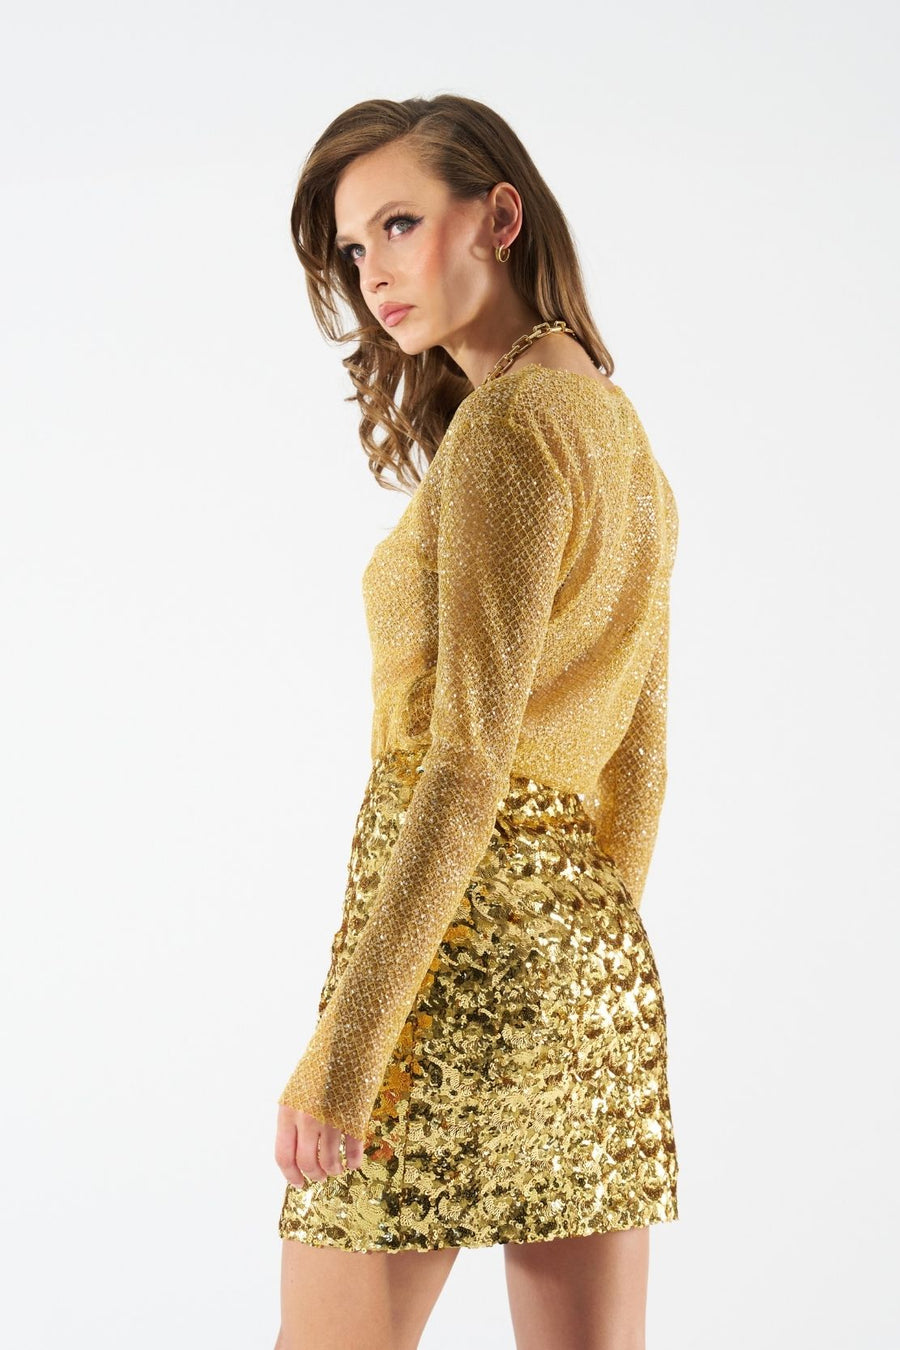 Gold Lace Top